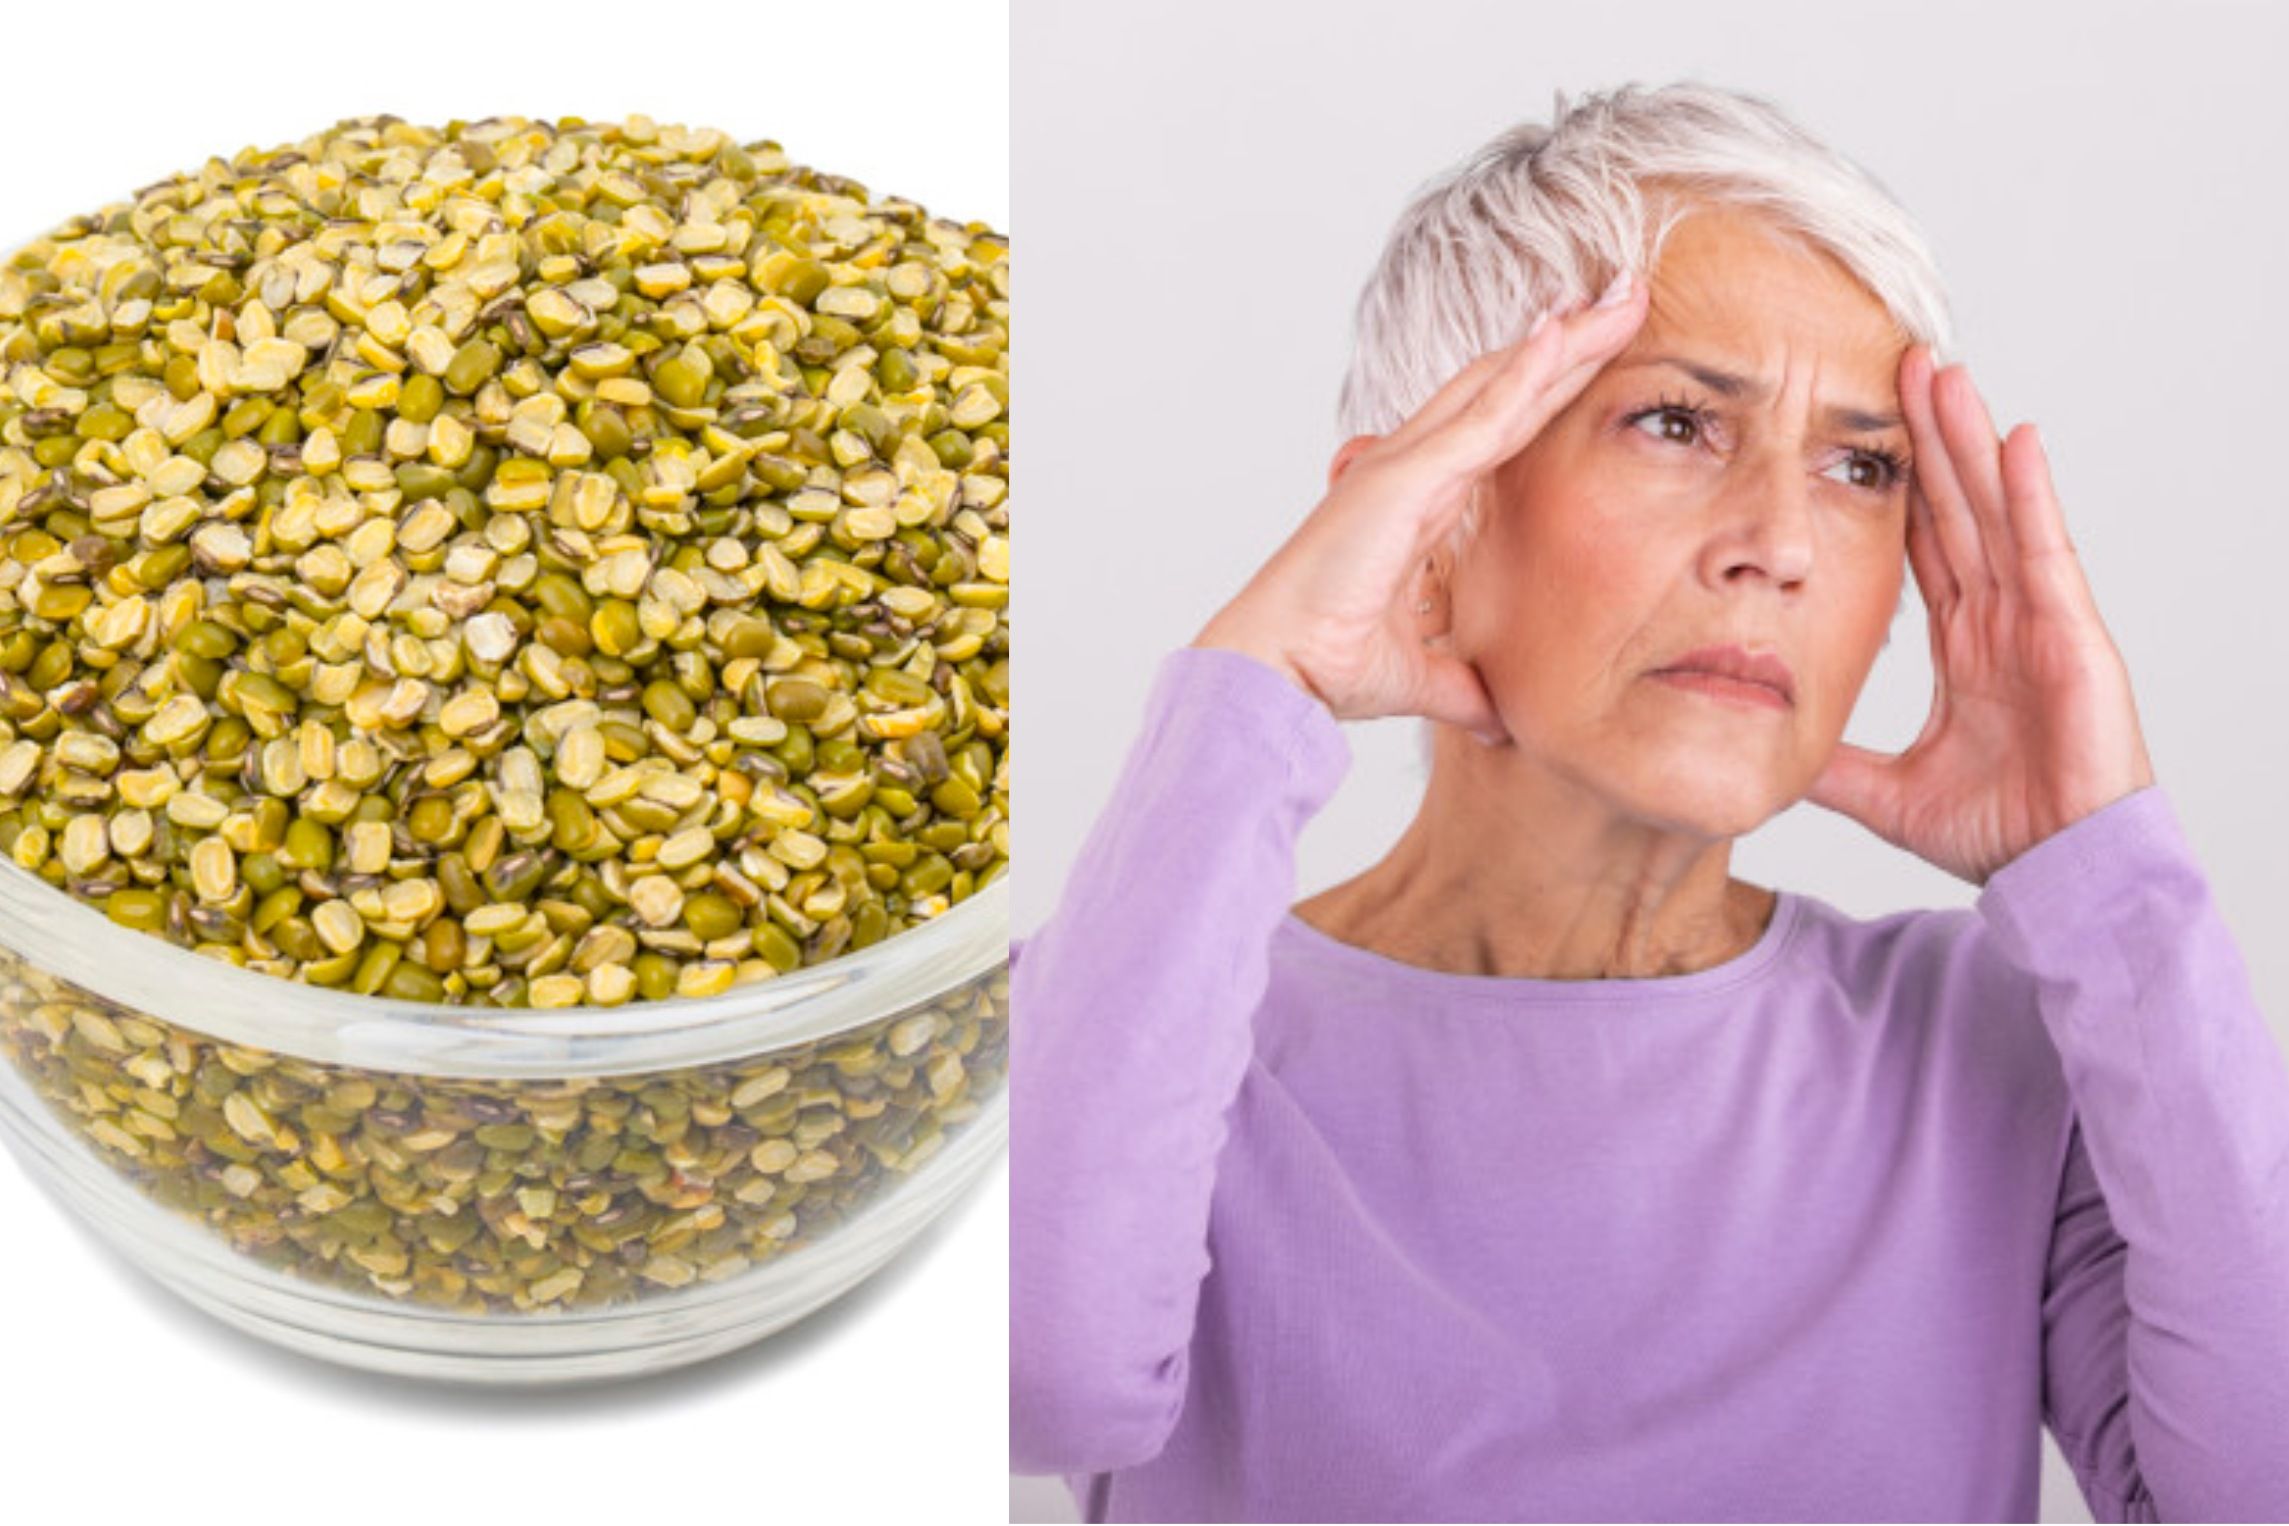 Herbs and Supplements for Menopause